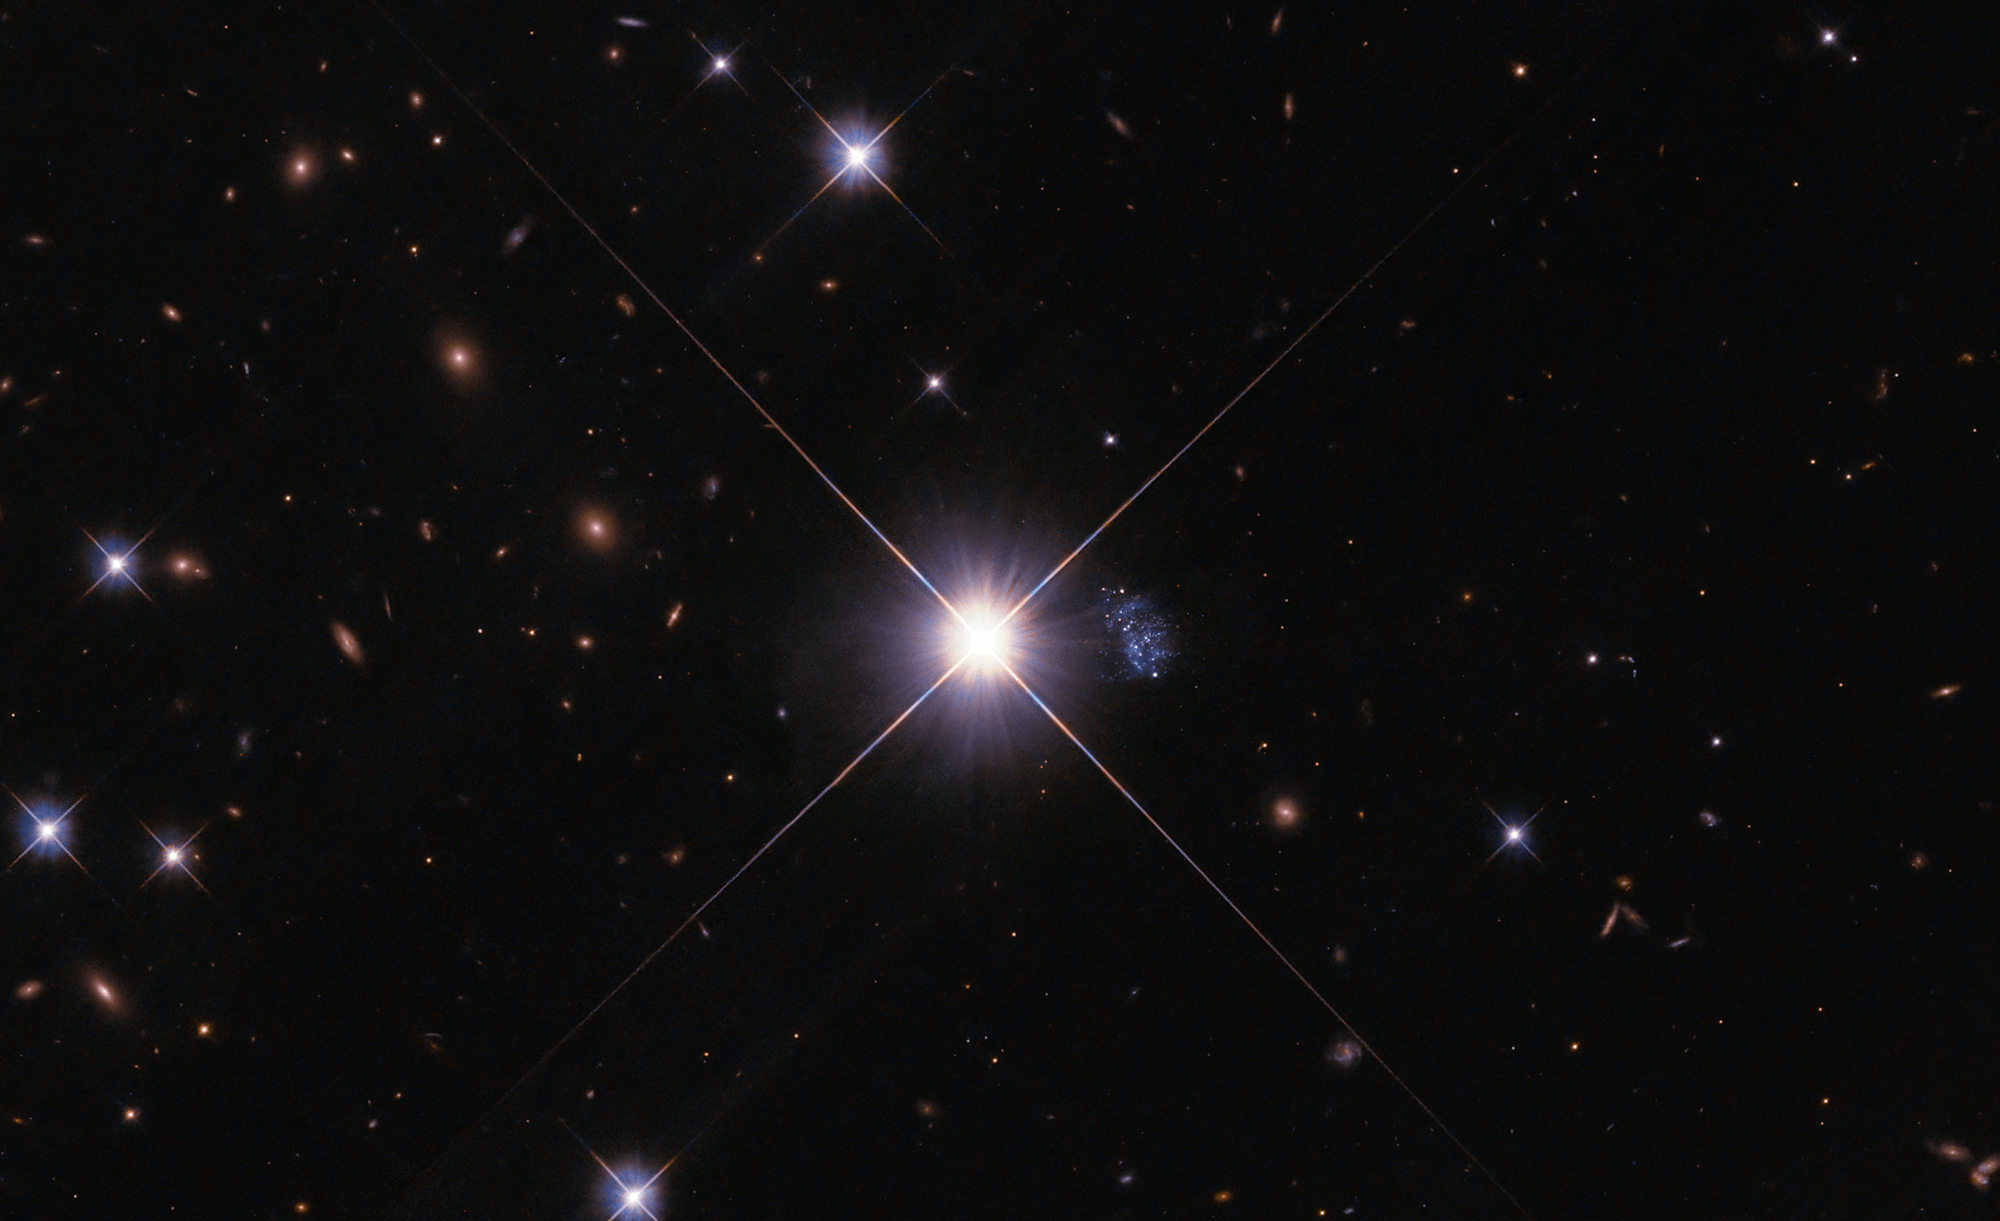 Black background peppered with blue-white stars and distant rusty-orange-red galaxies. center of image: bright star that holds a gaseous, blue, elongated, amorphous mass peppered with white stars just to the right of the star.